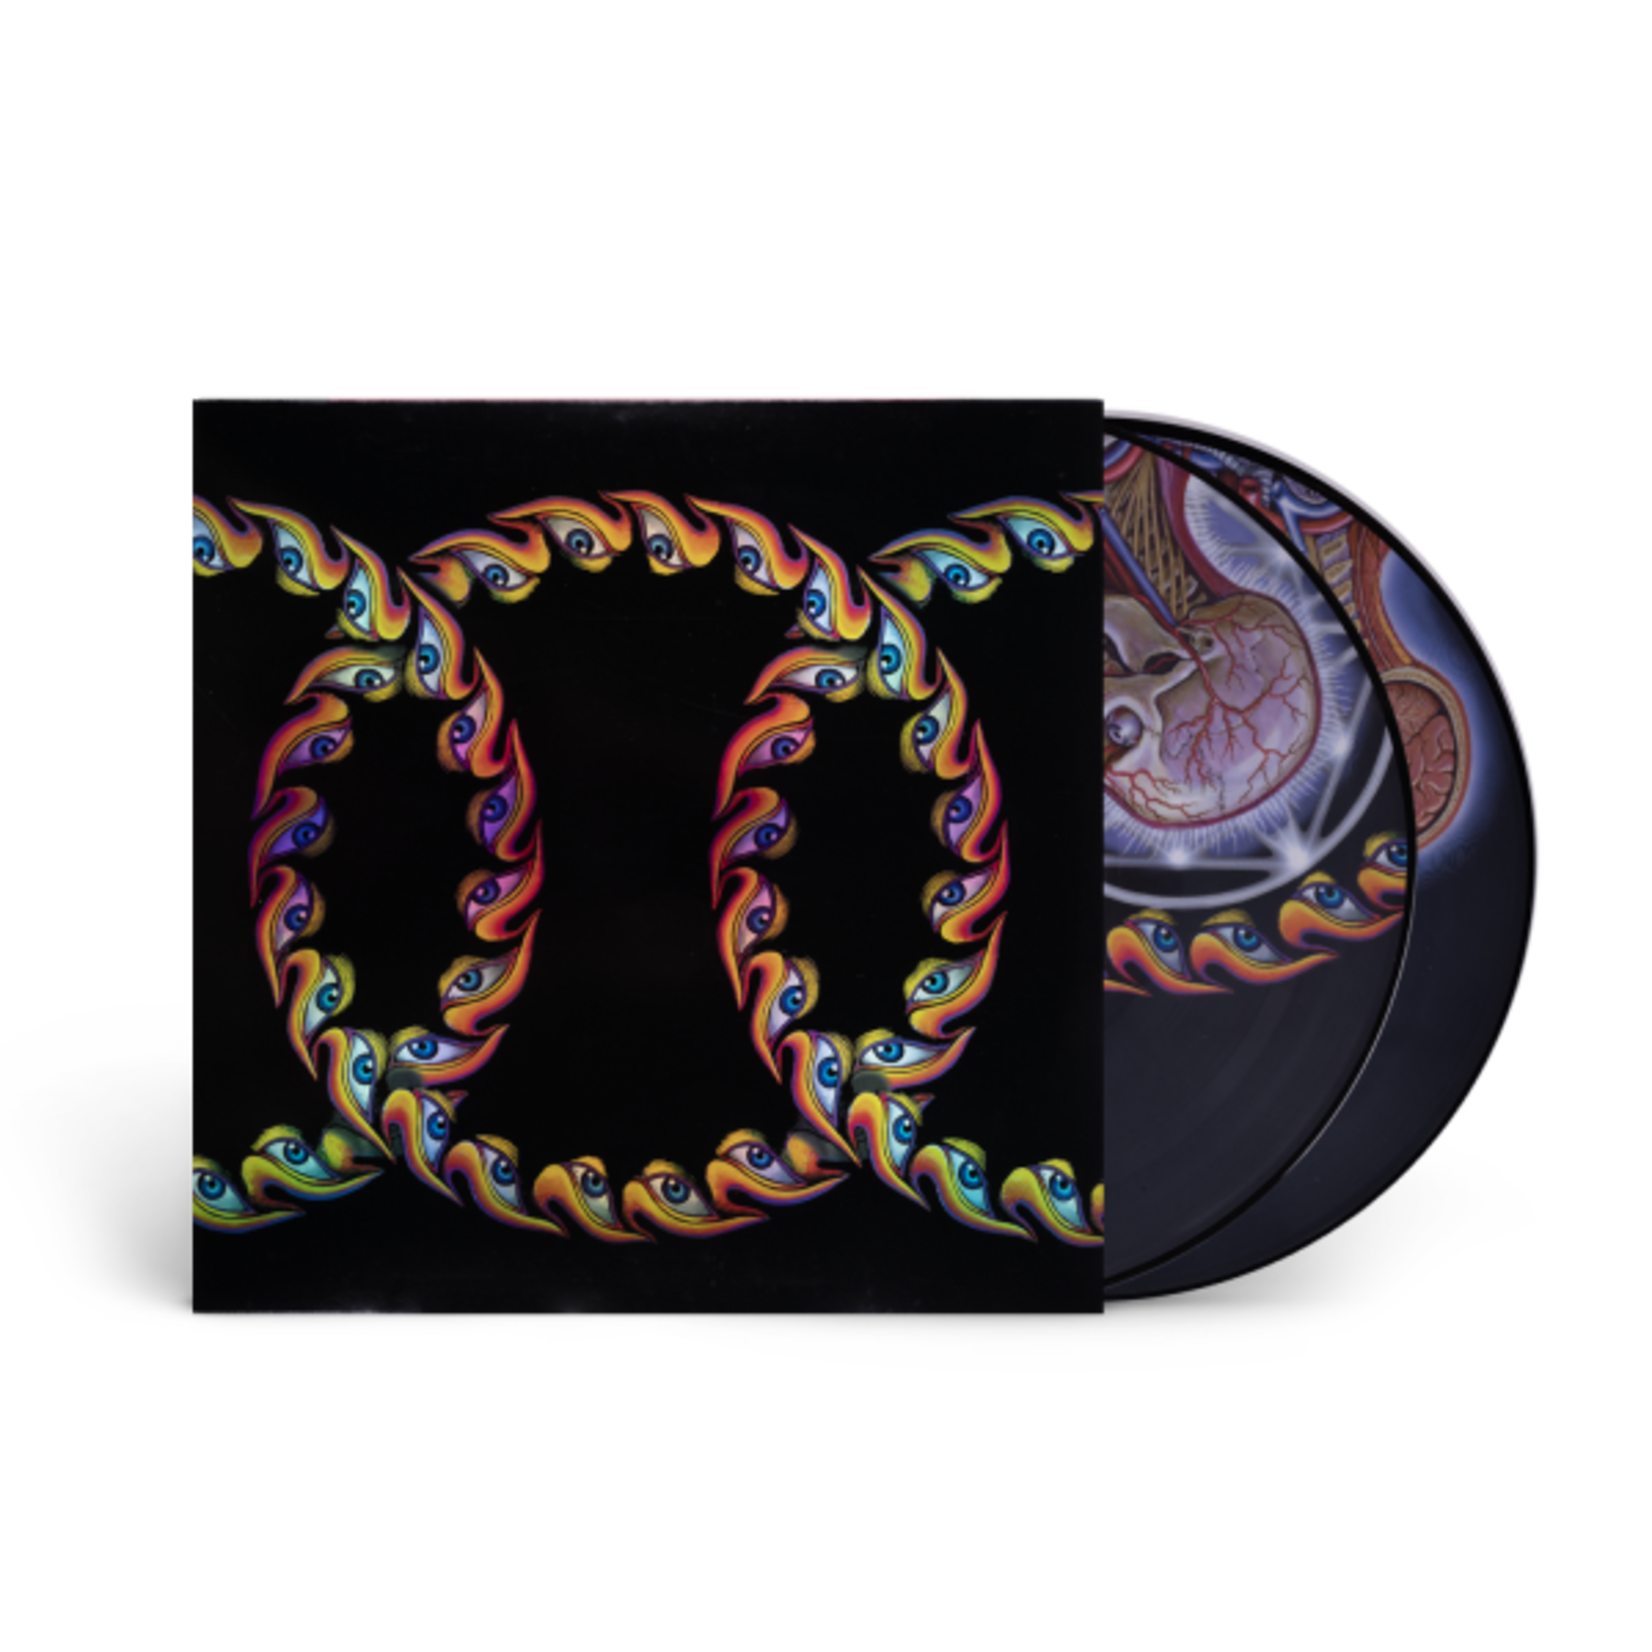 Tool - Lateralus [2LP]